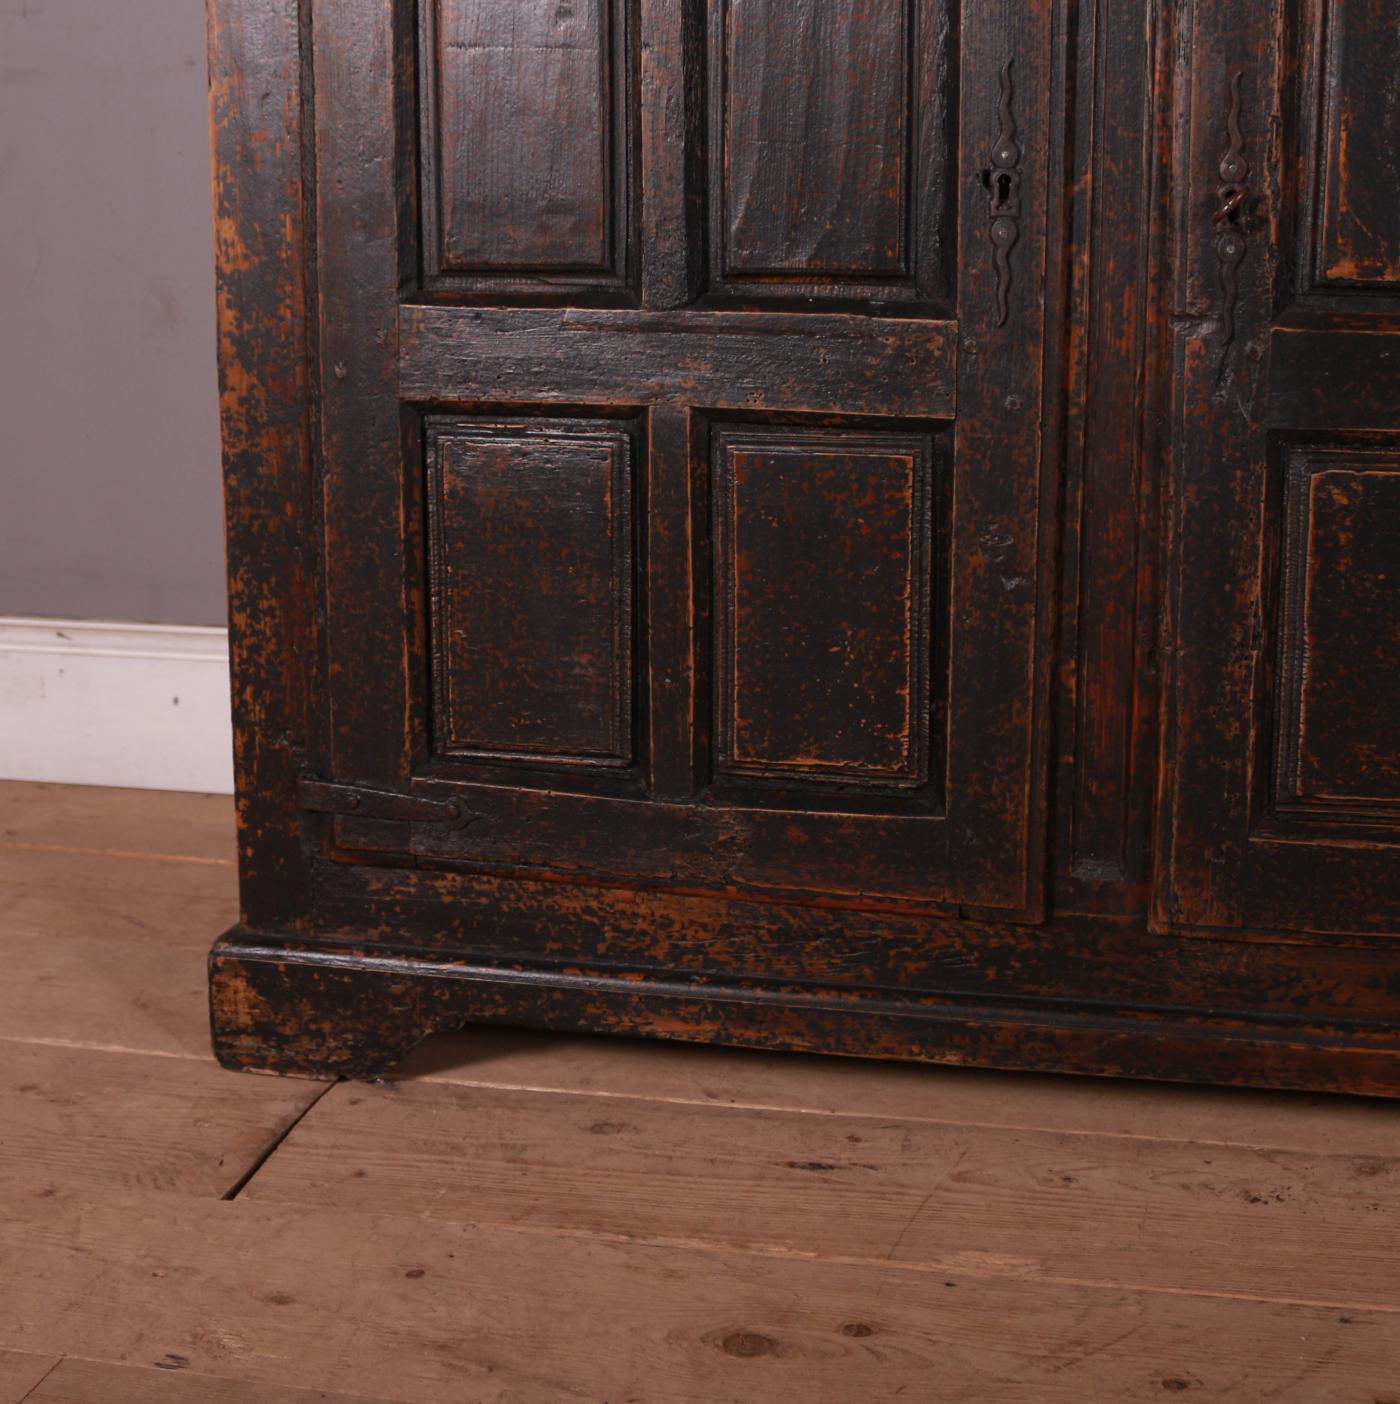 Wonderful late 18th C French painted oak food cupboard with spindle doors. 1780.

Internal depth is 15